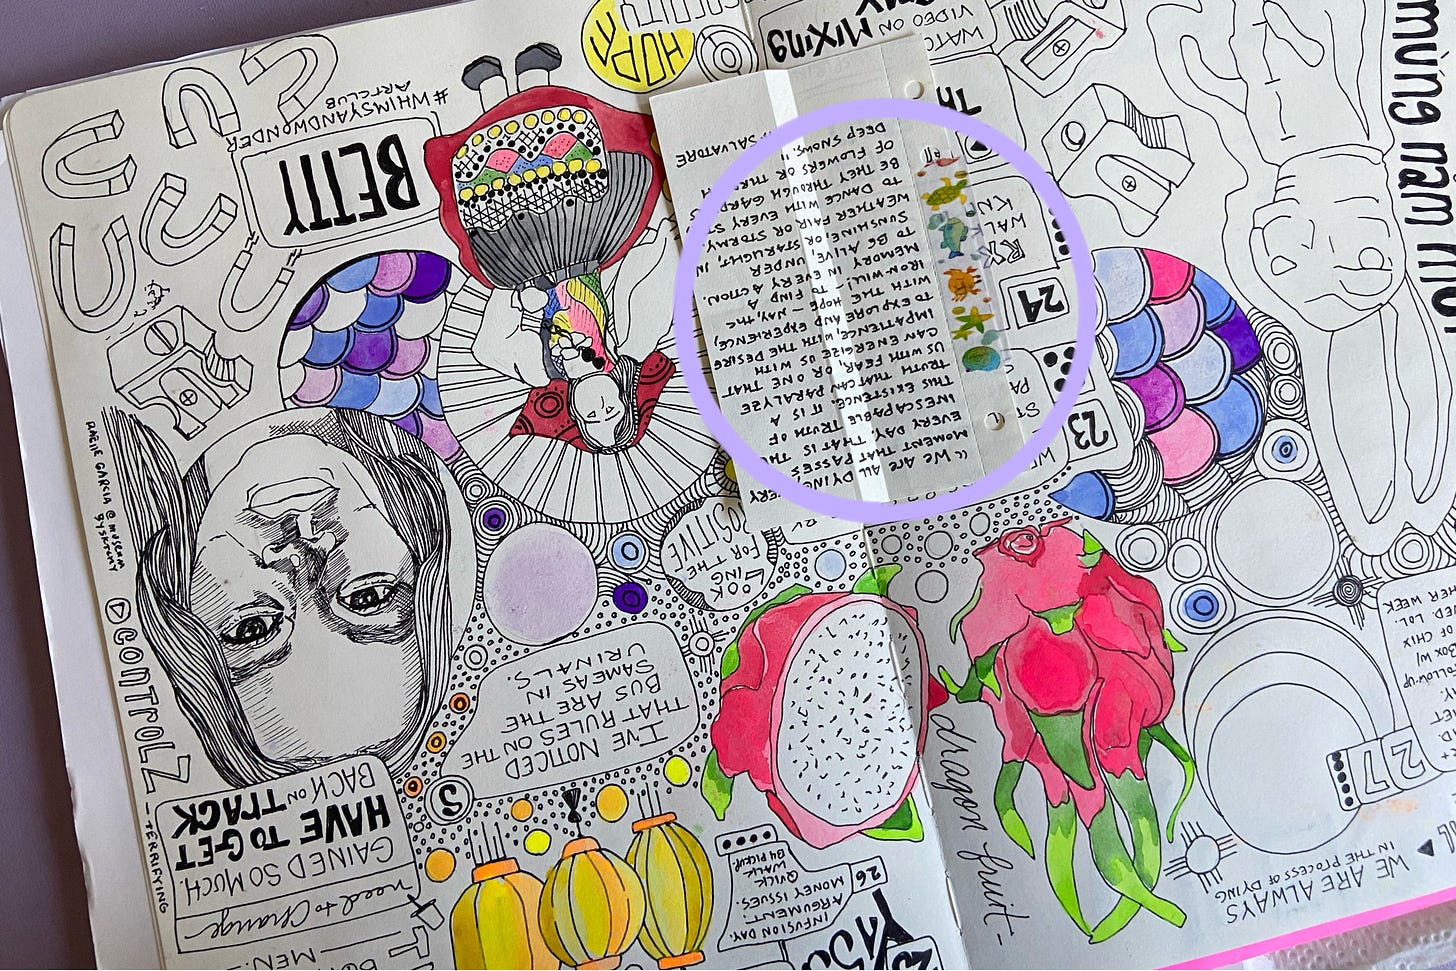 Illustrated journal page examples with privacy steps highlighted - copyright A Cowen 